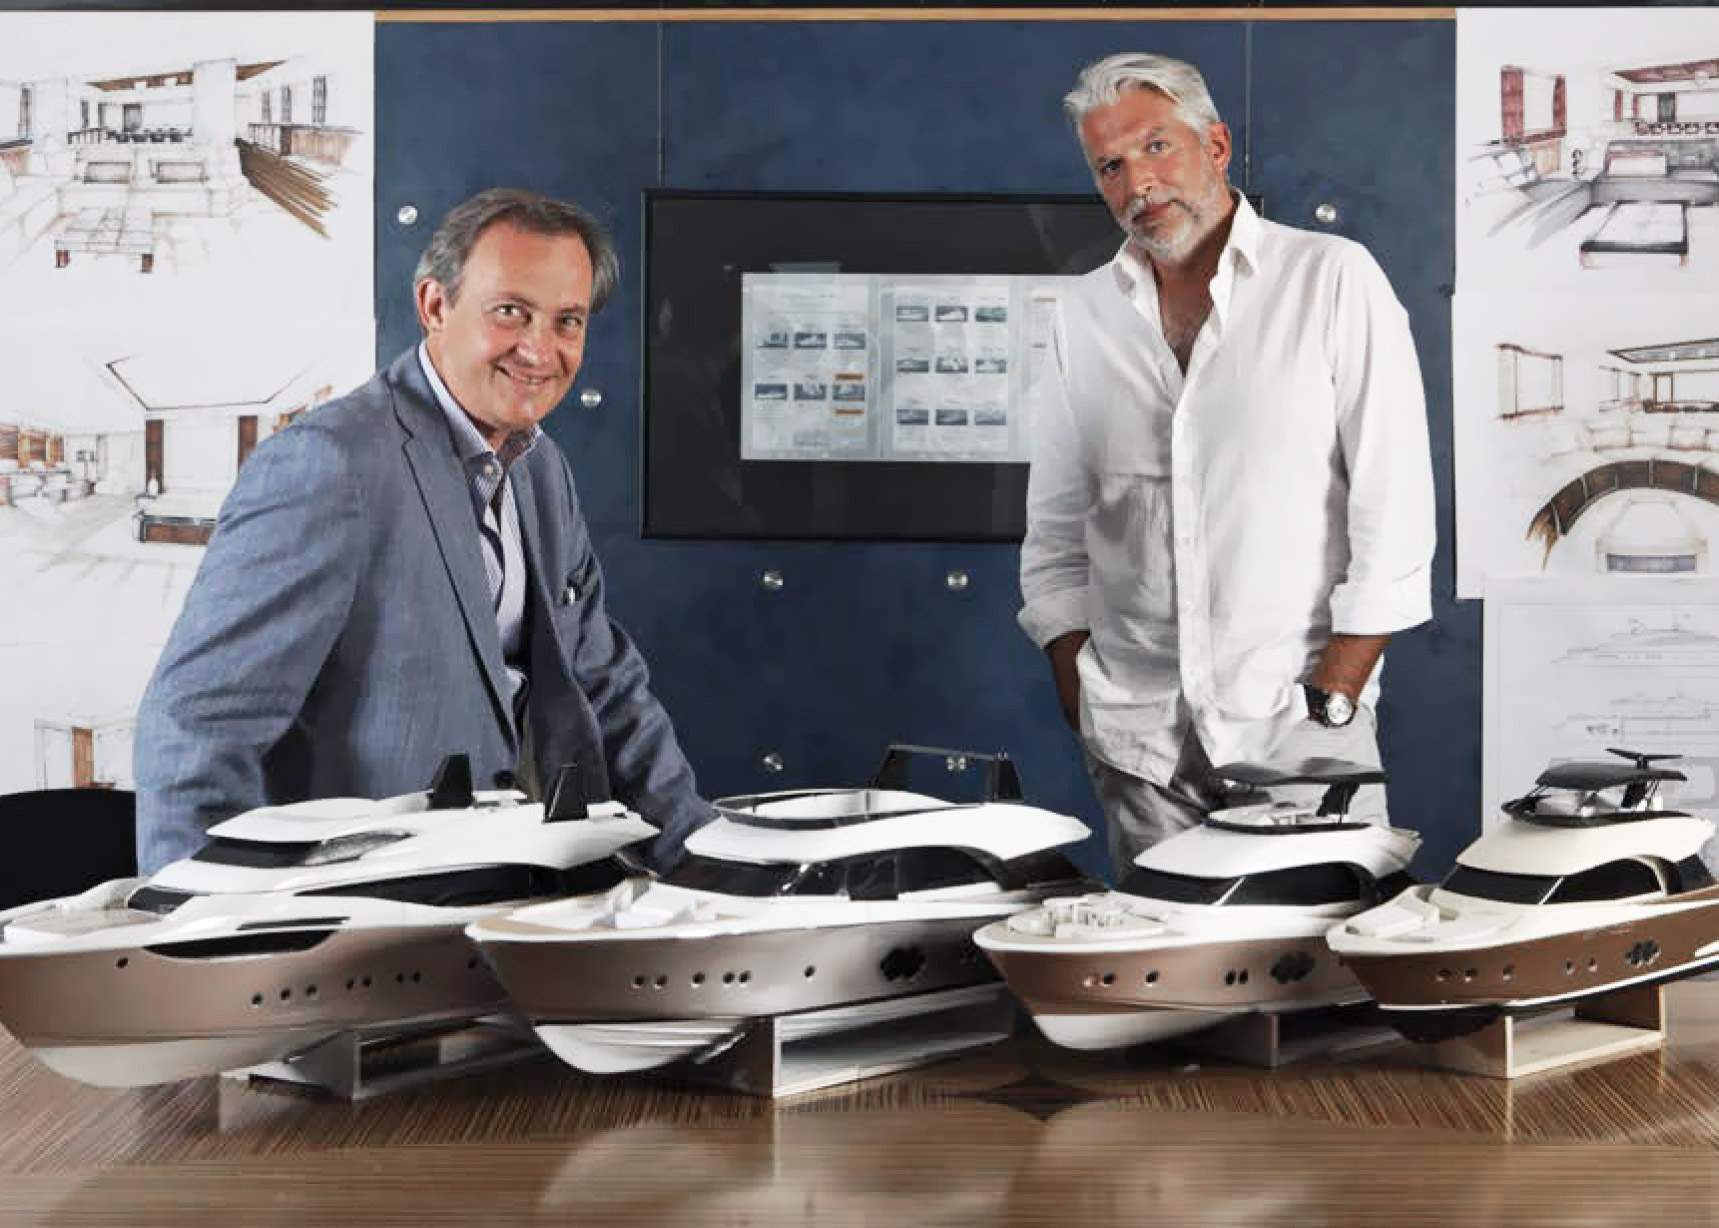 Together with Carlo Nuvolari and Dan Lenard, Monte Carlo Yachts has redefined the meaning of words such as style, functionality and customization.